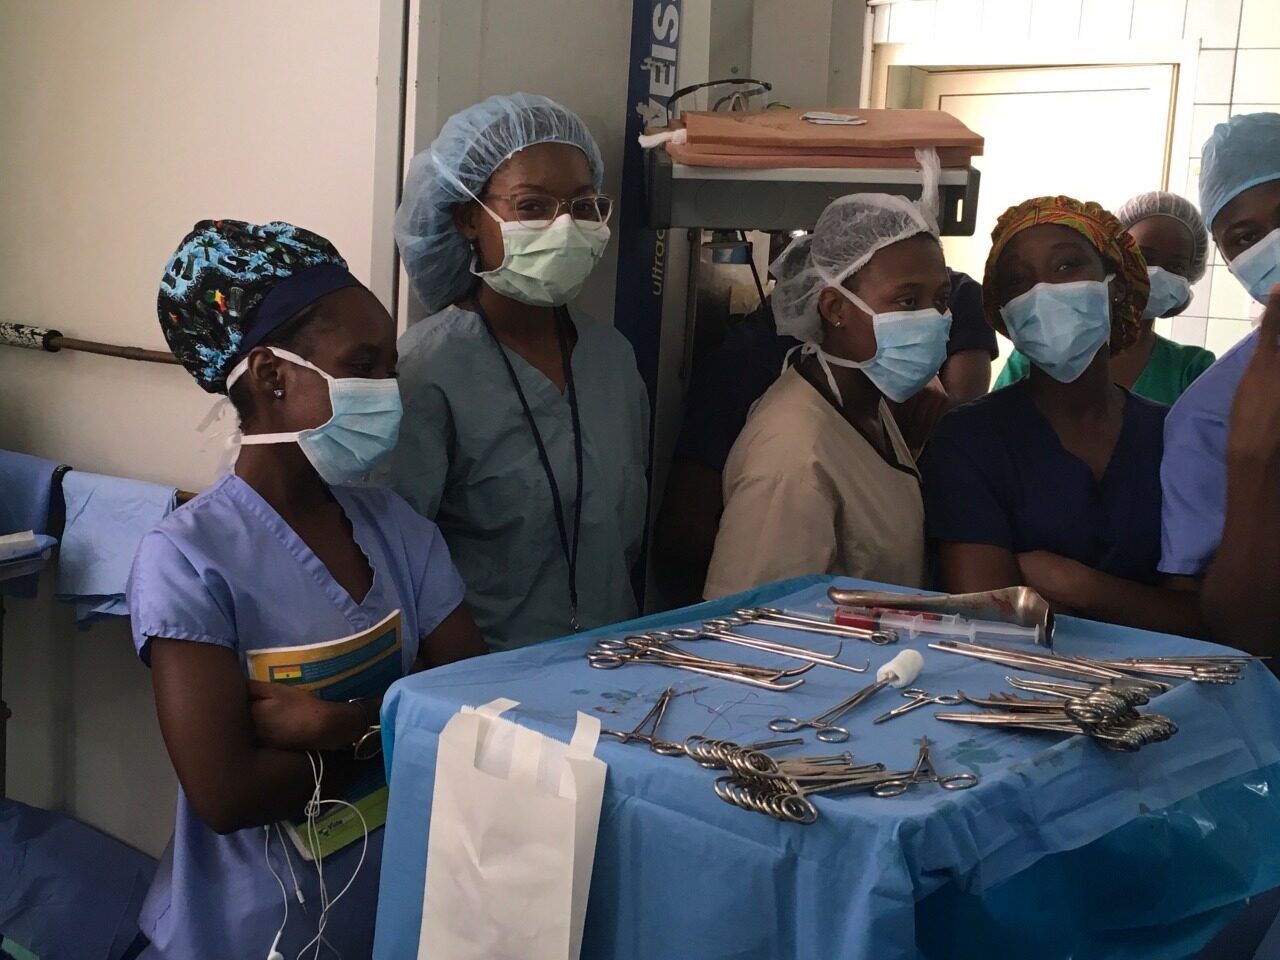 A group of medical personnel in hair caps and surgical masks behind a tray of surgical tools